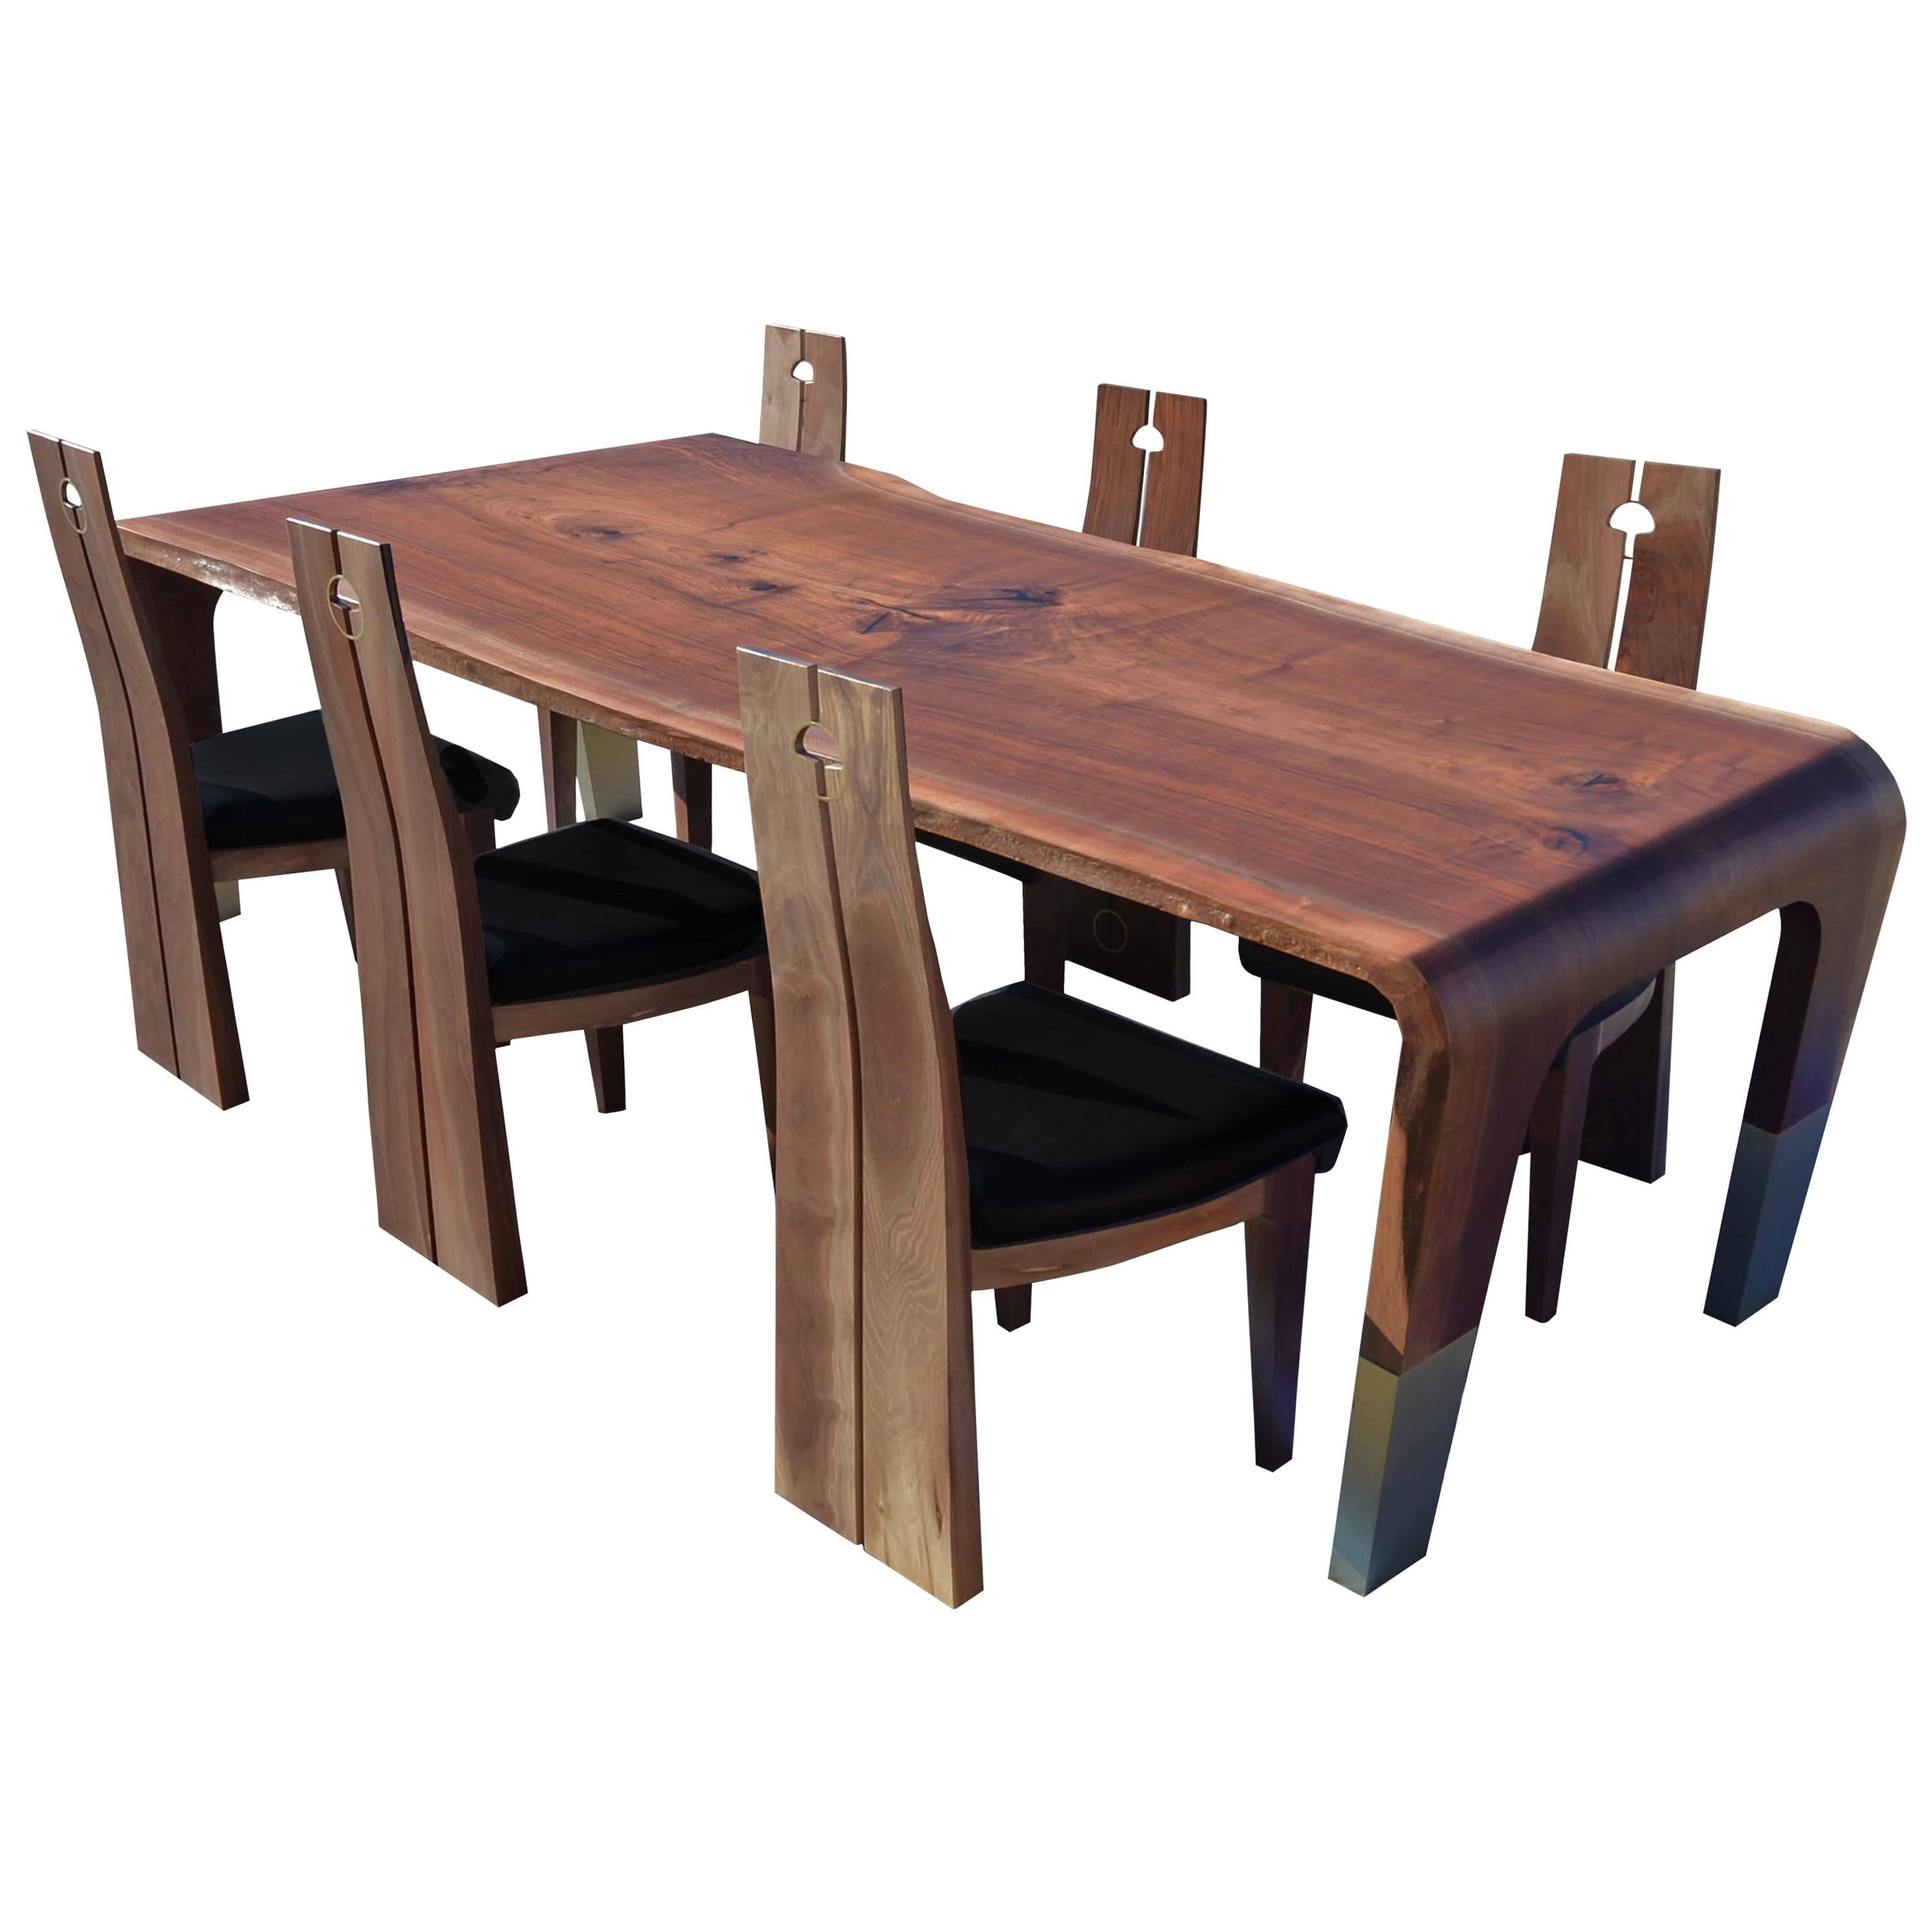 oneTree Walnut Slab Dining Table and Chairs with Bronze Leg and Key Detail For Sale